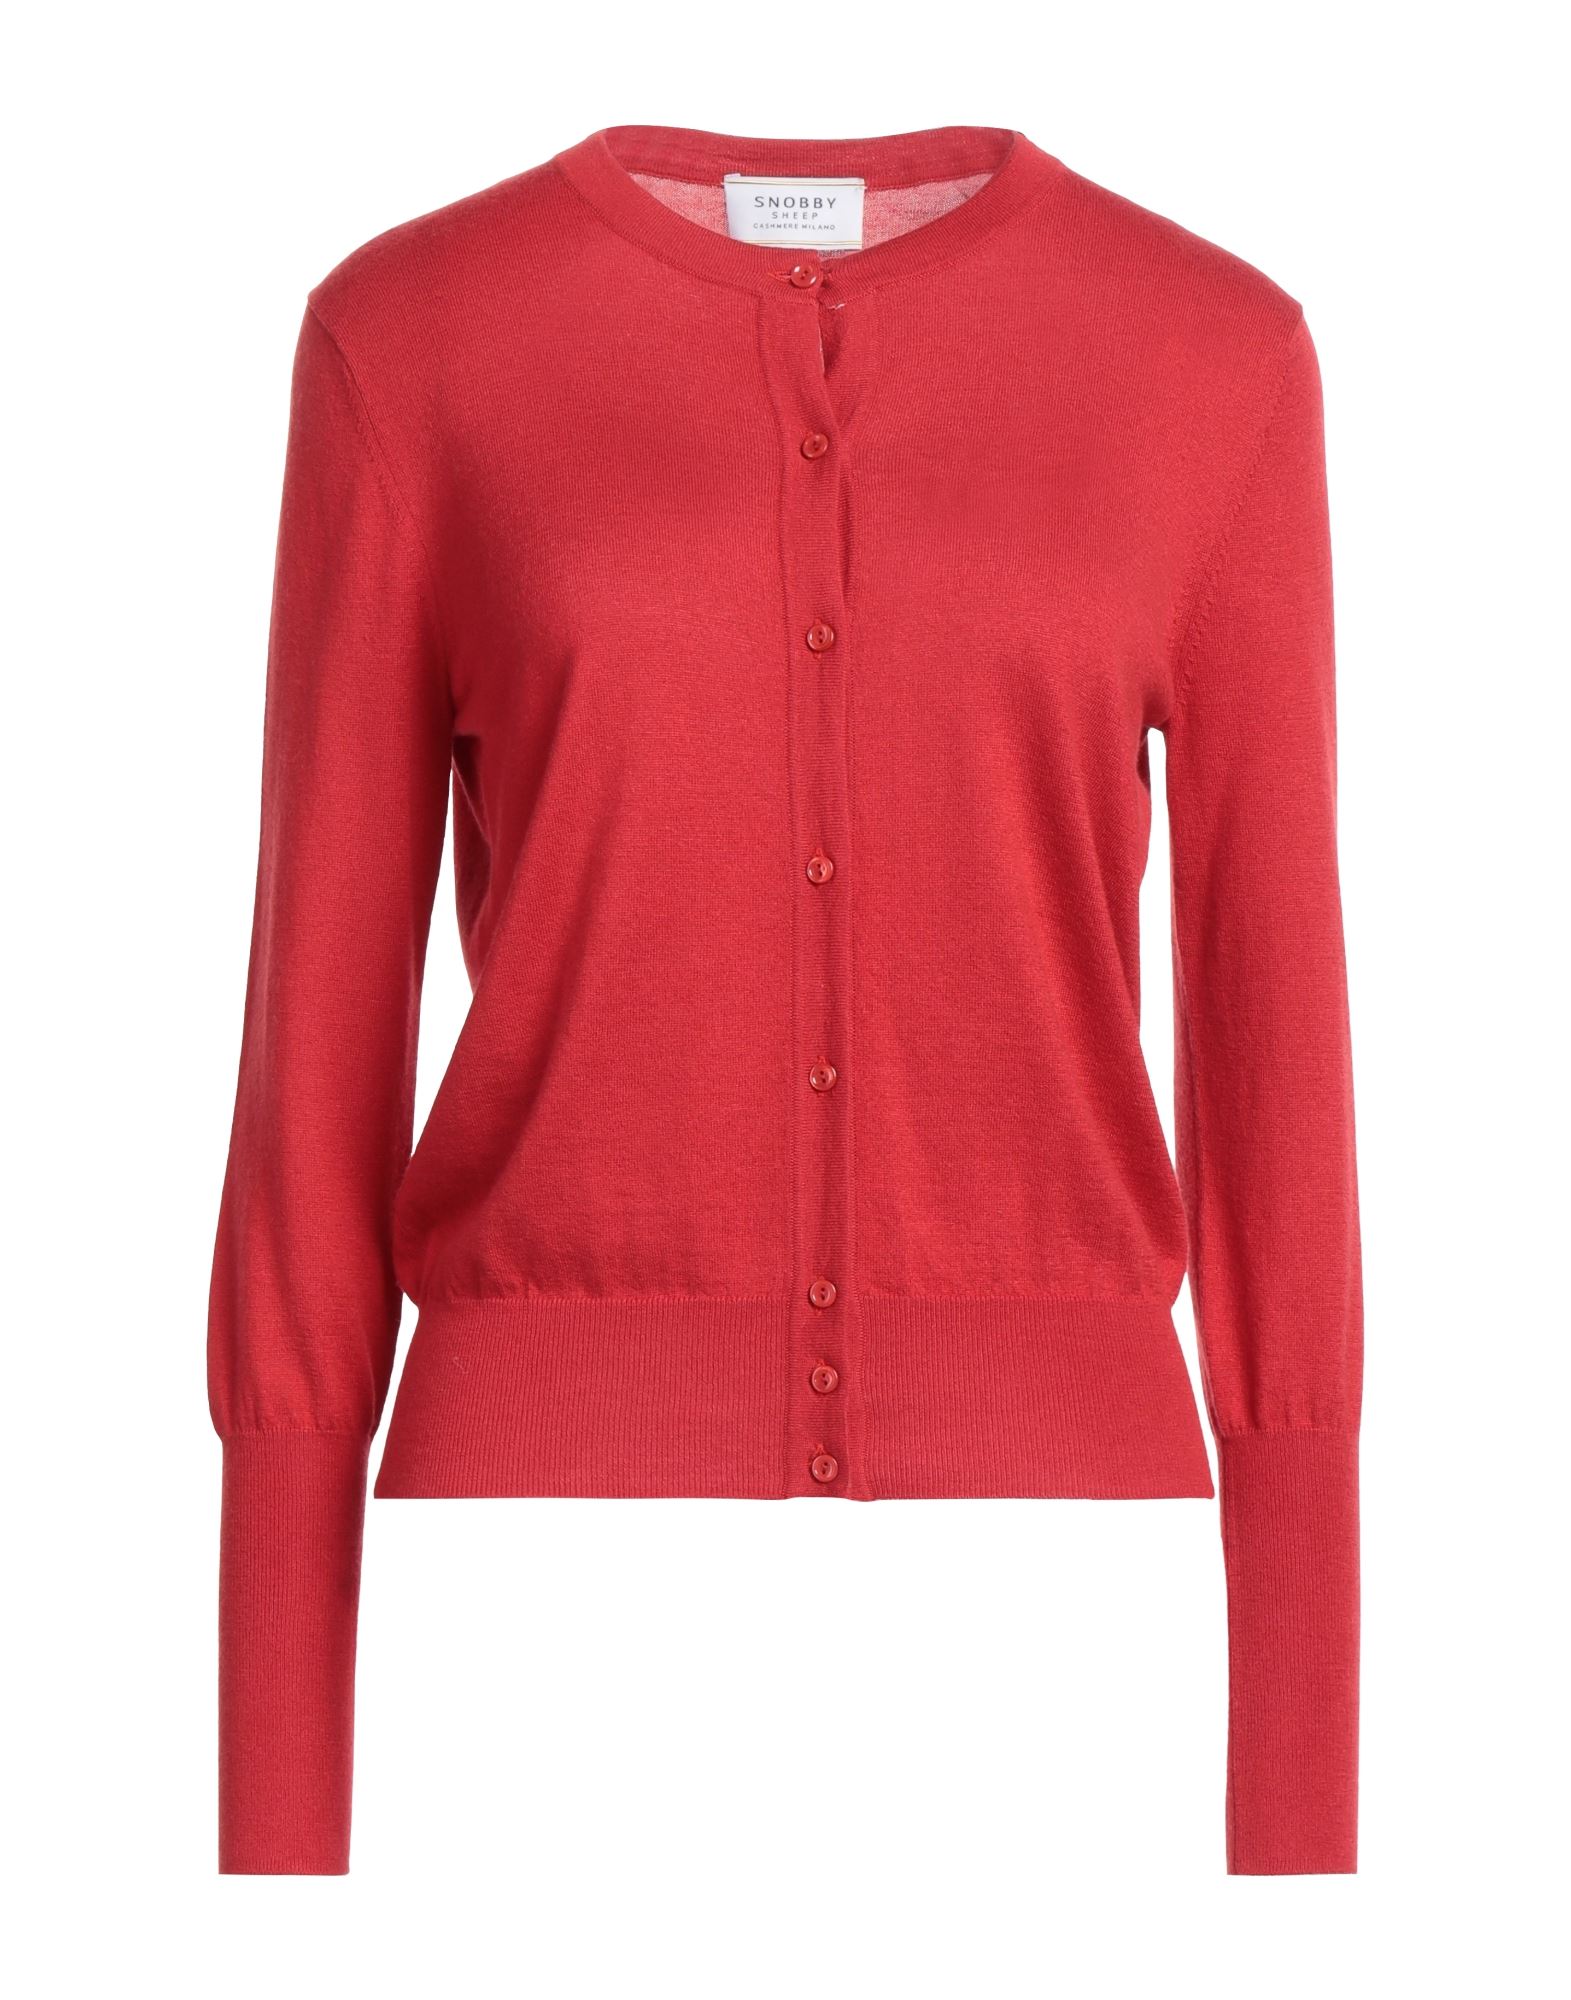 Snobby Sheep Cardigans In Red